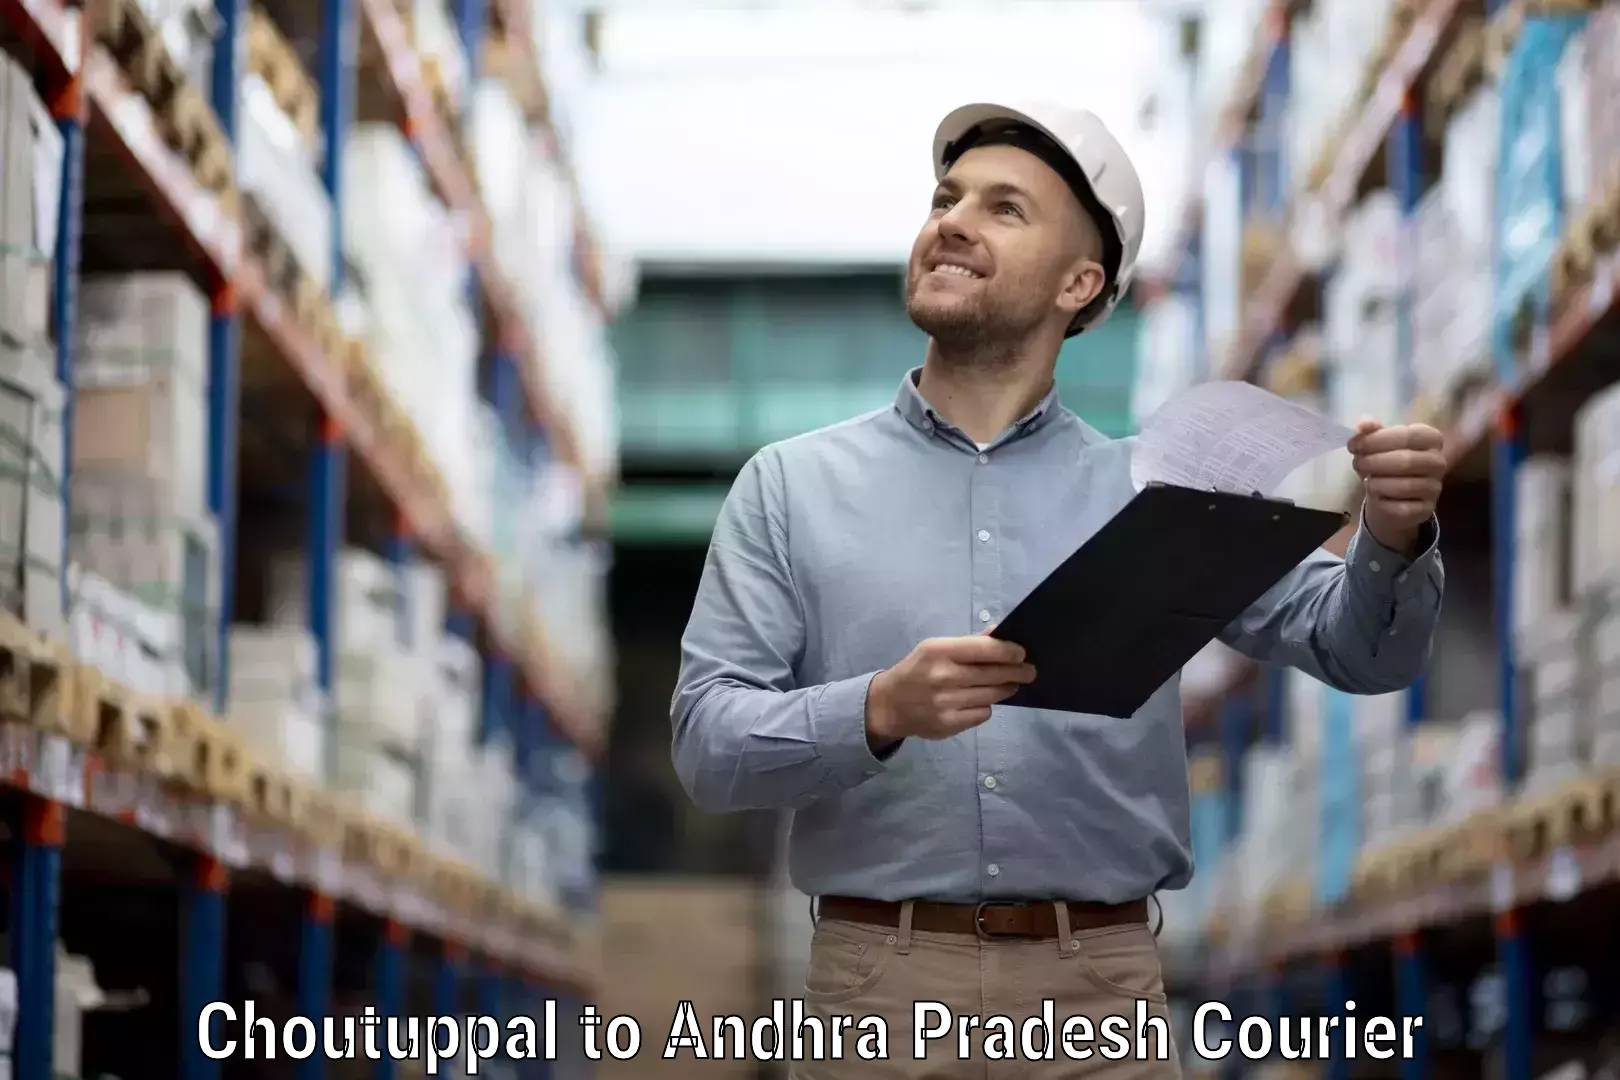 Affordable parcel service Choutuppal to Visakhapatnam